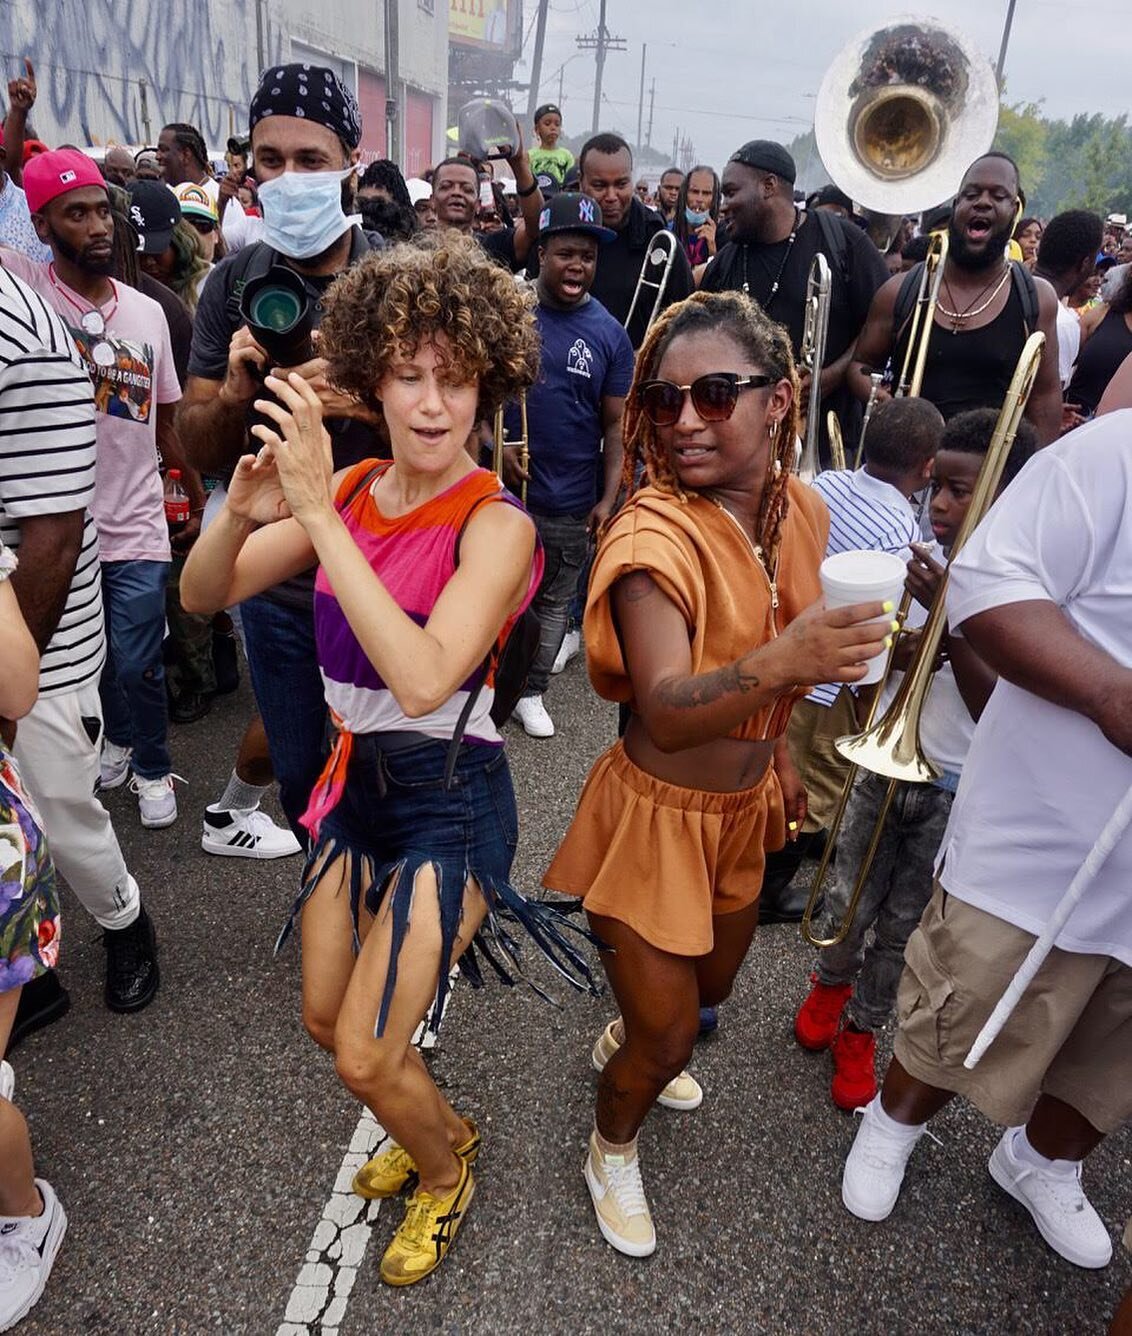 Perfect Gentleman second line Fathers Day 2021 New Orleans @charleslovellart first second line since the pandemic @charleslovellart #secondlinesunday #secondline #secondlinesundays #colorphotography #neworleans